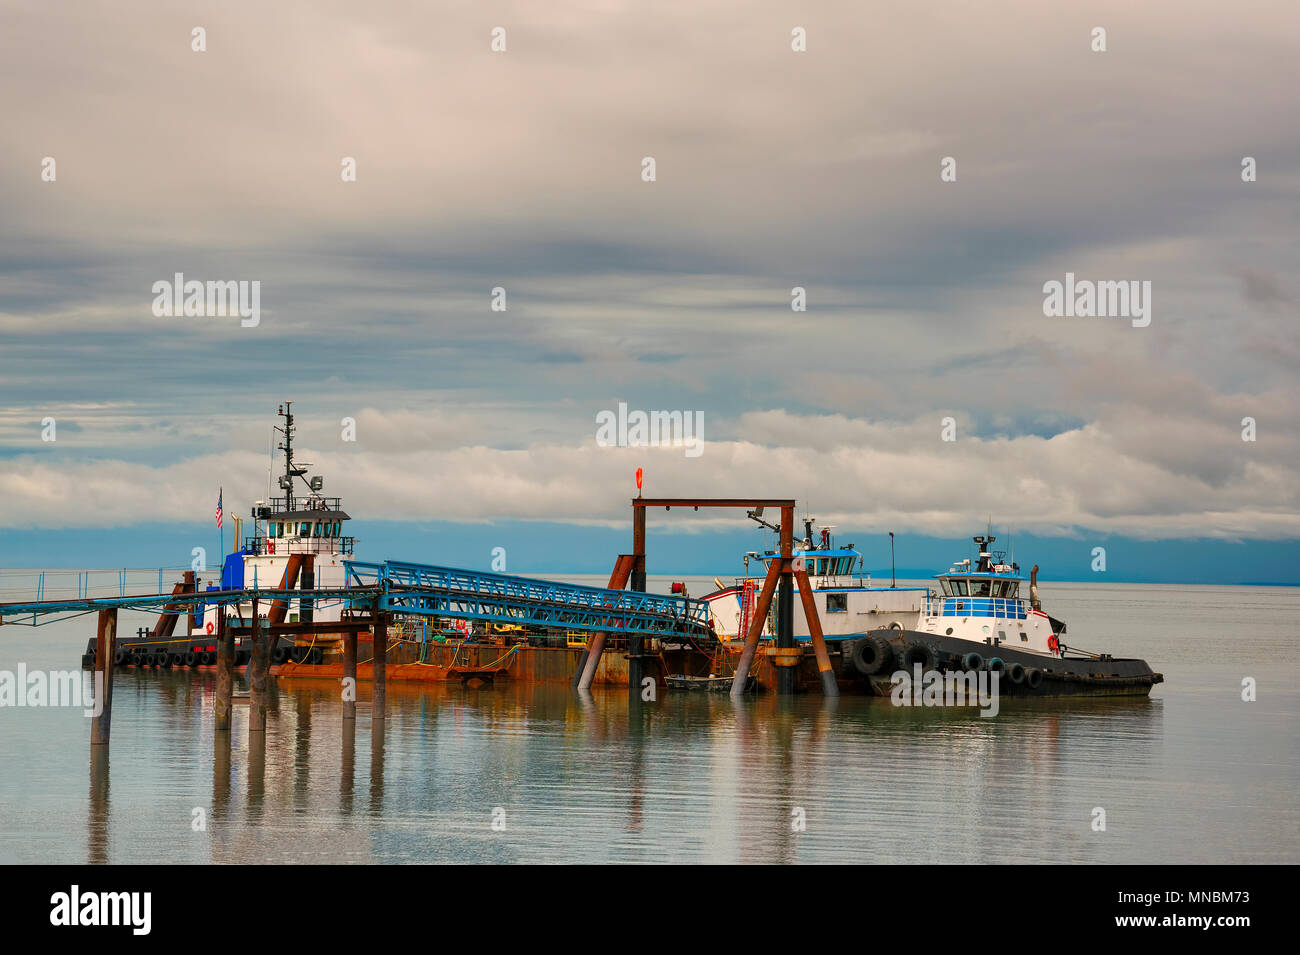 Boats docked to pier in Cook's Inlet in Anchorage, Alaska. Stock Photo